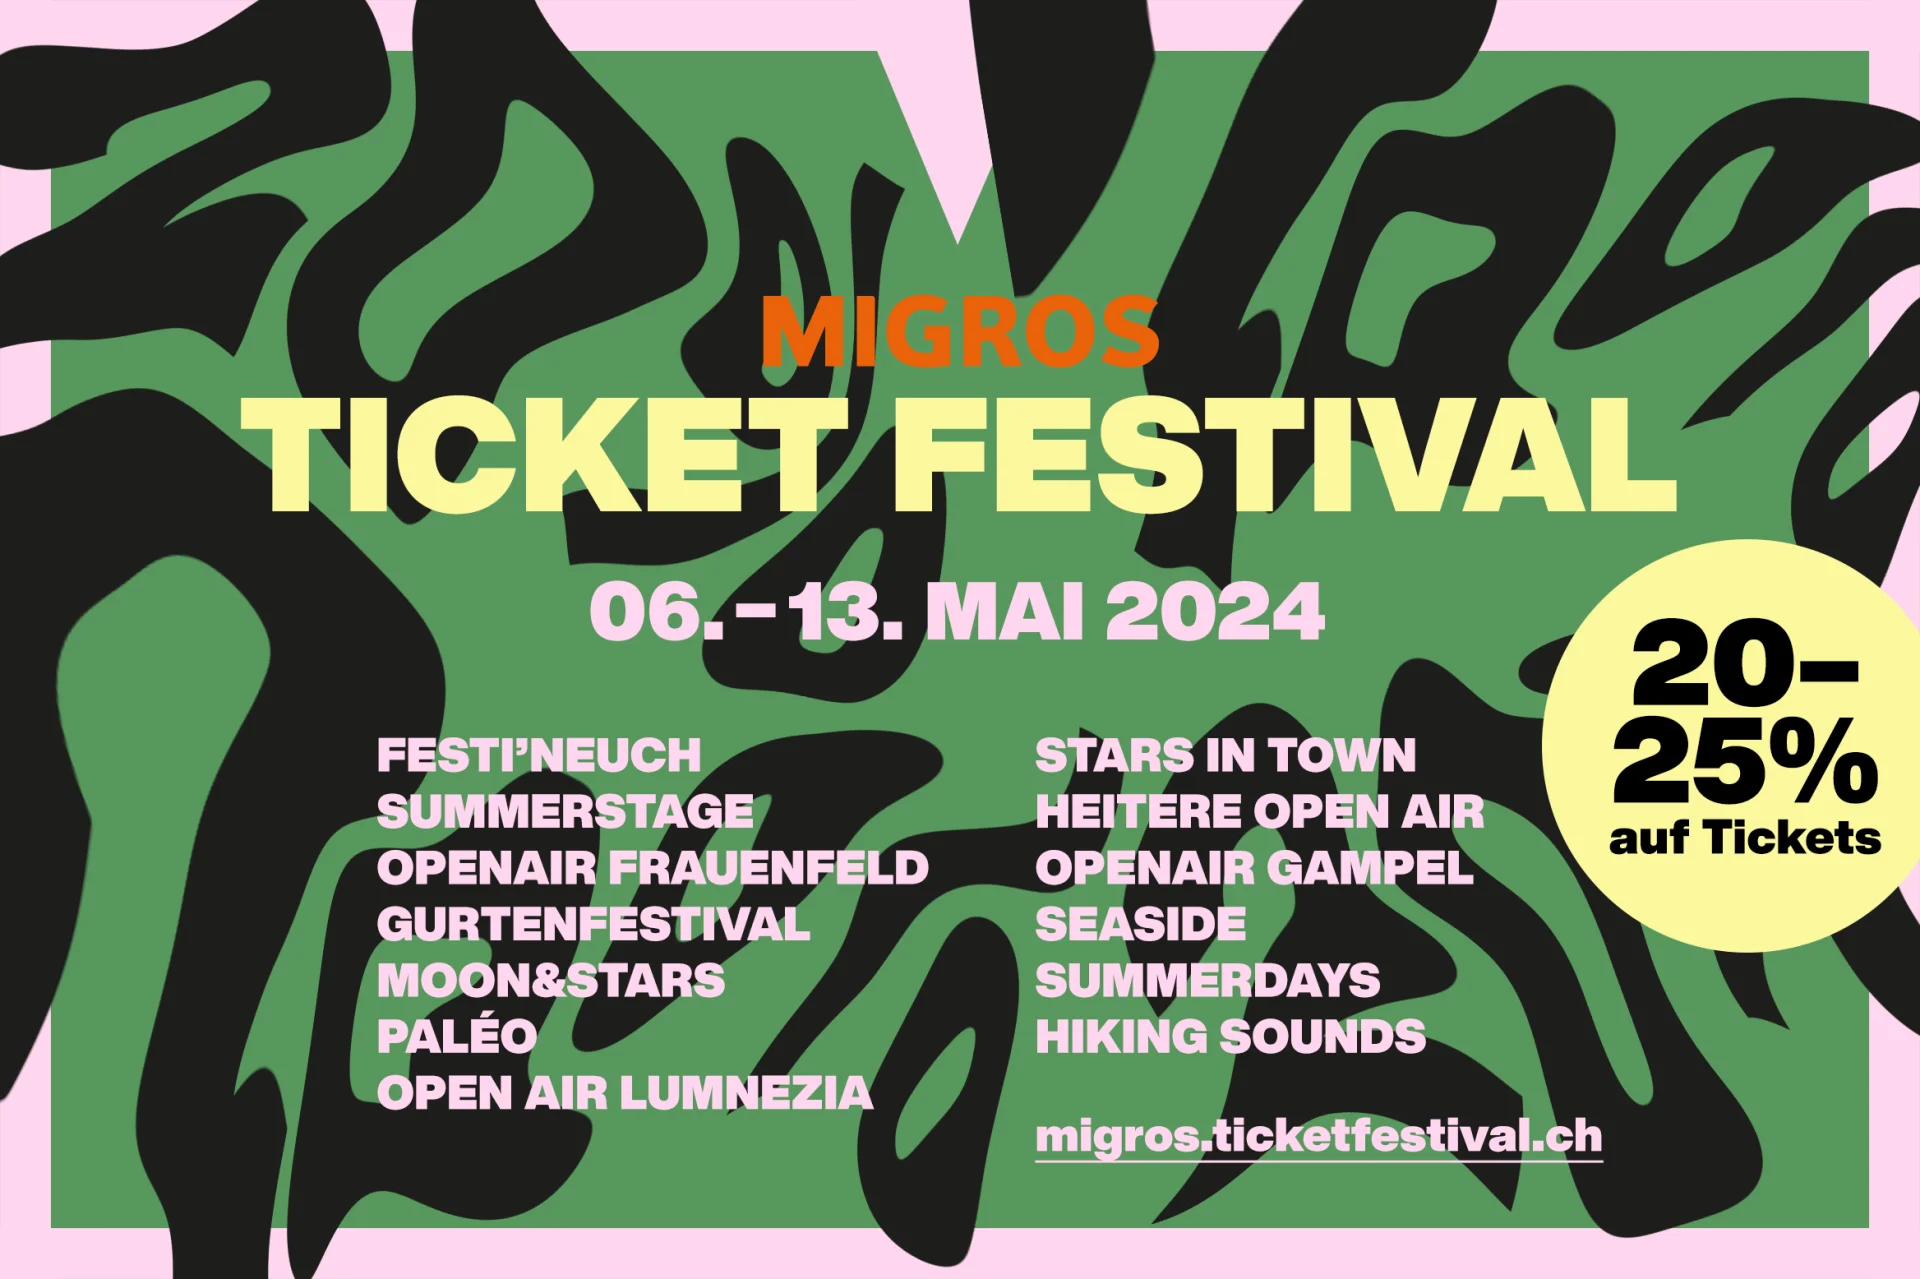 Campaign illustration for the Migros Ticket Festival